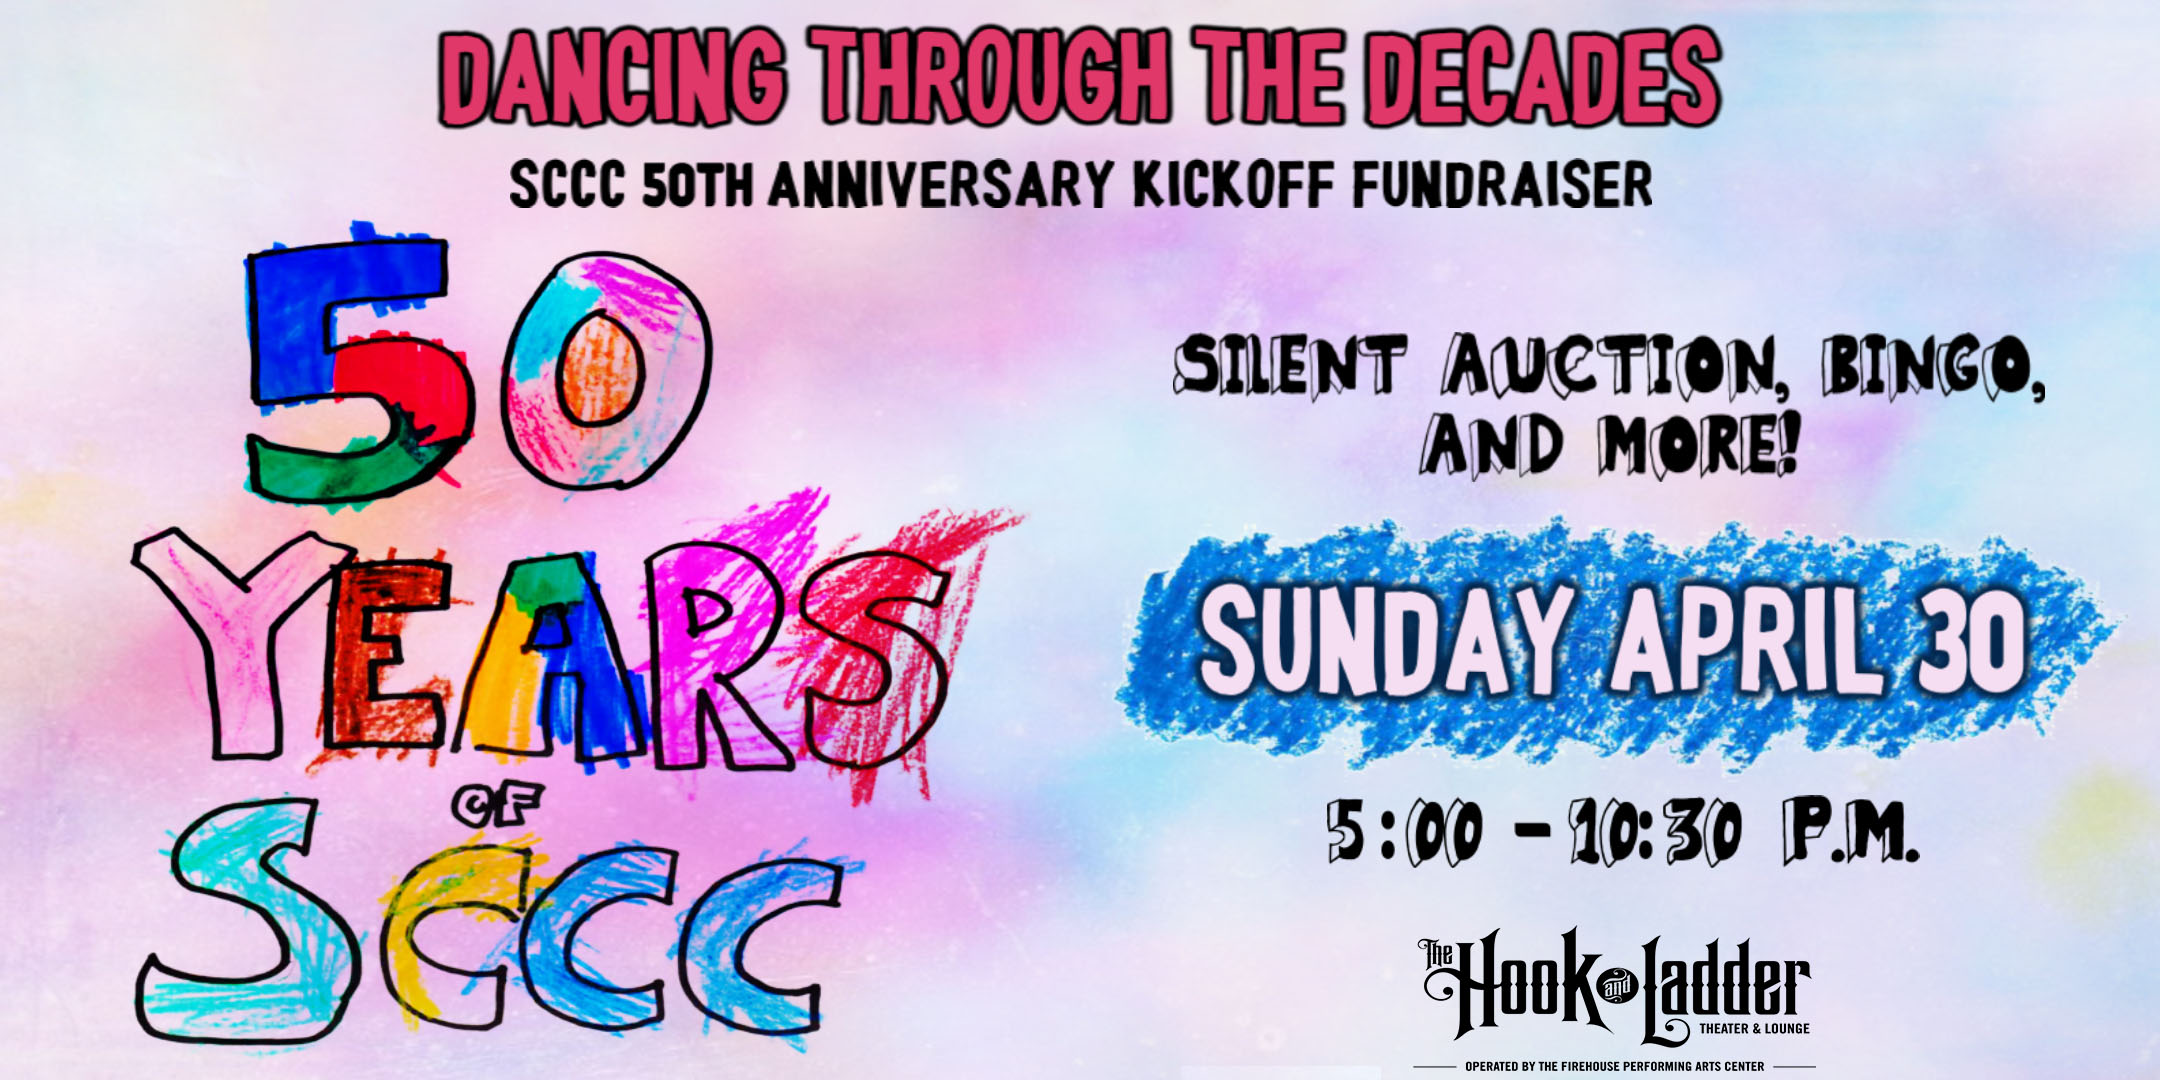 Dancing through the Decades - SCCC 50th Anniversary Kickoff Fundraiser Sunday, April 30 The Hook and Ladder Theatre! 5:00-10:30 p.m. General Admission * $30 (drink incl) / $50 (2 drinks incl) * Does not include fees NO REFUNDS